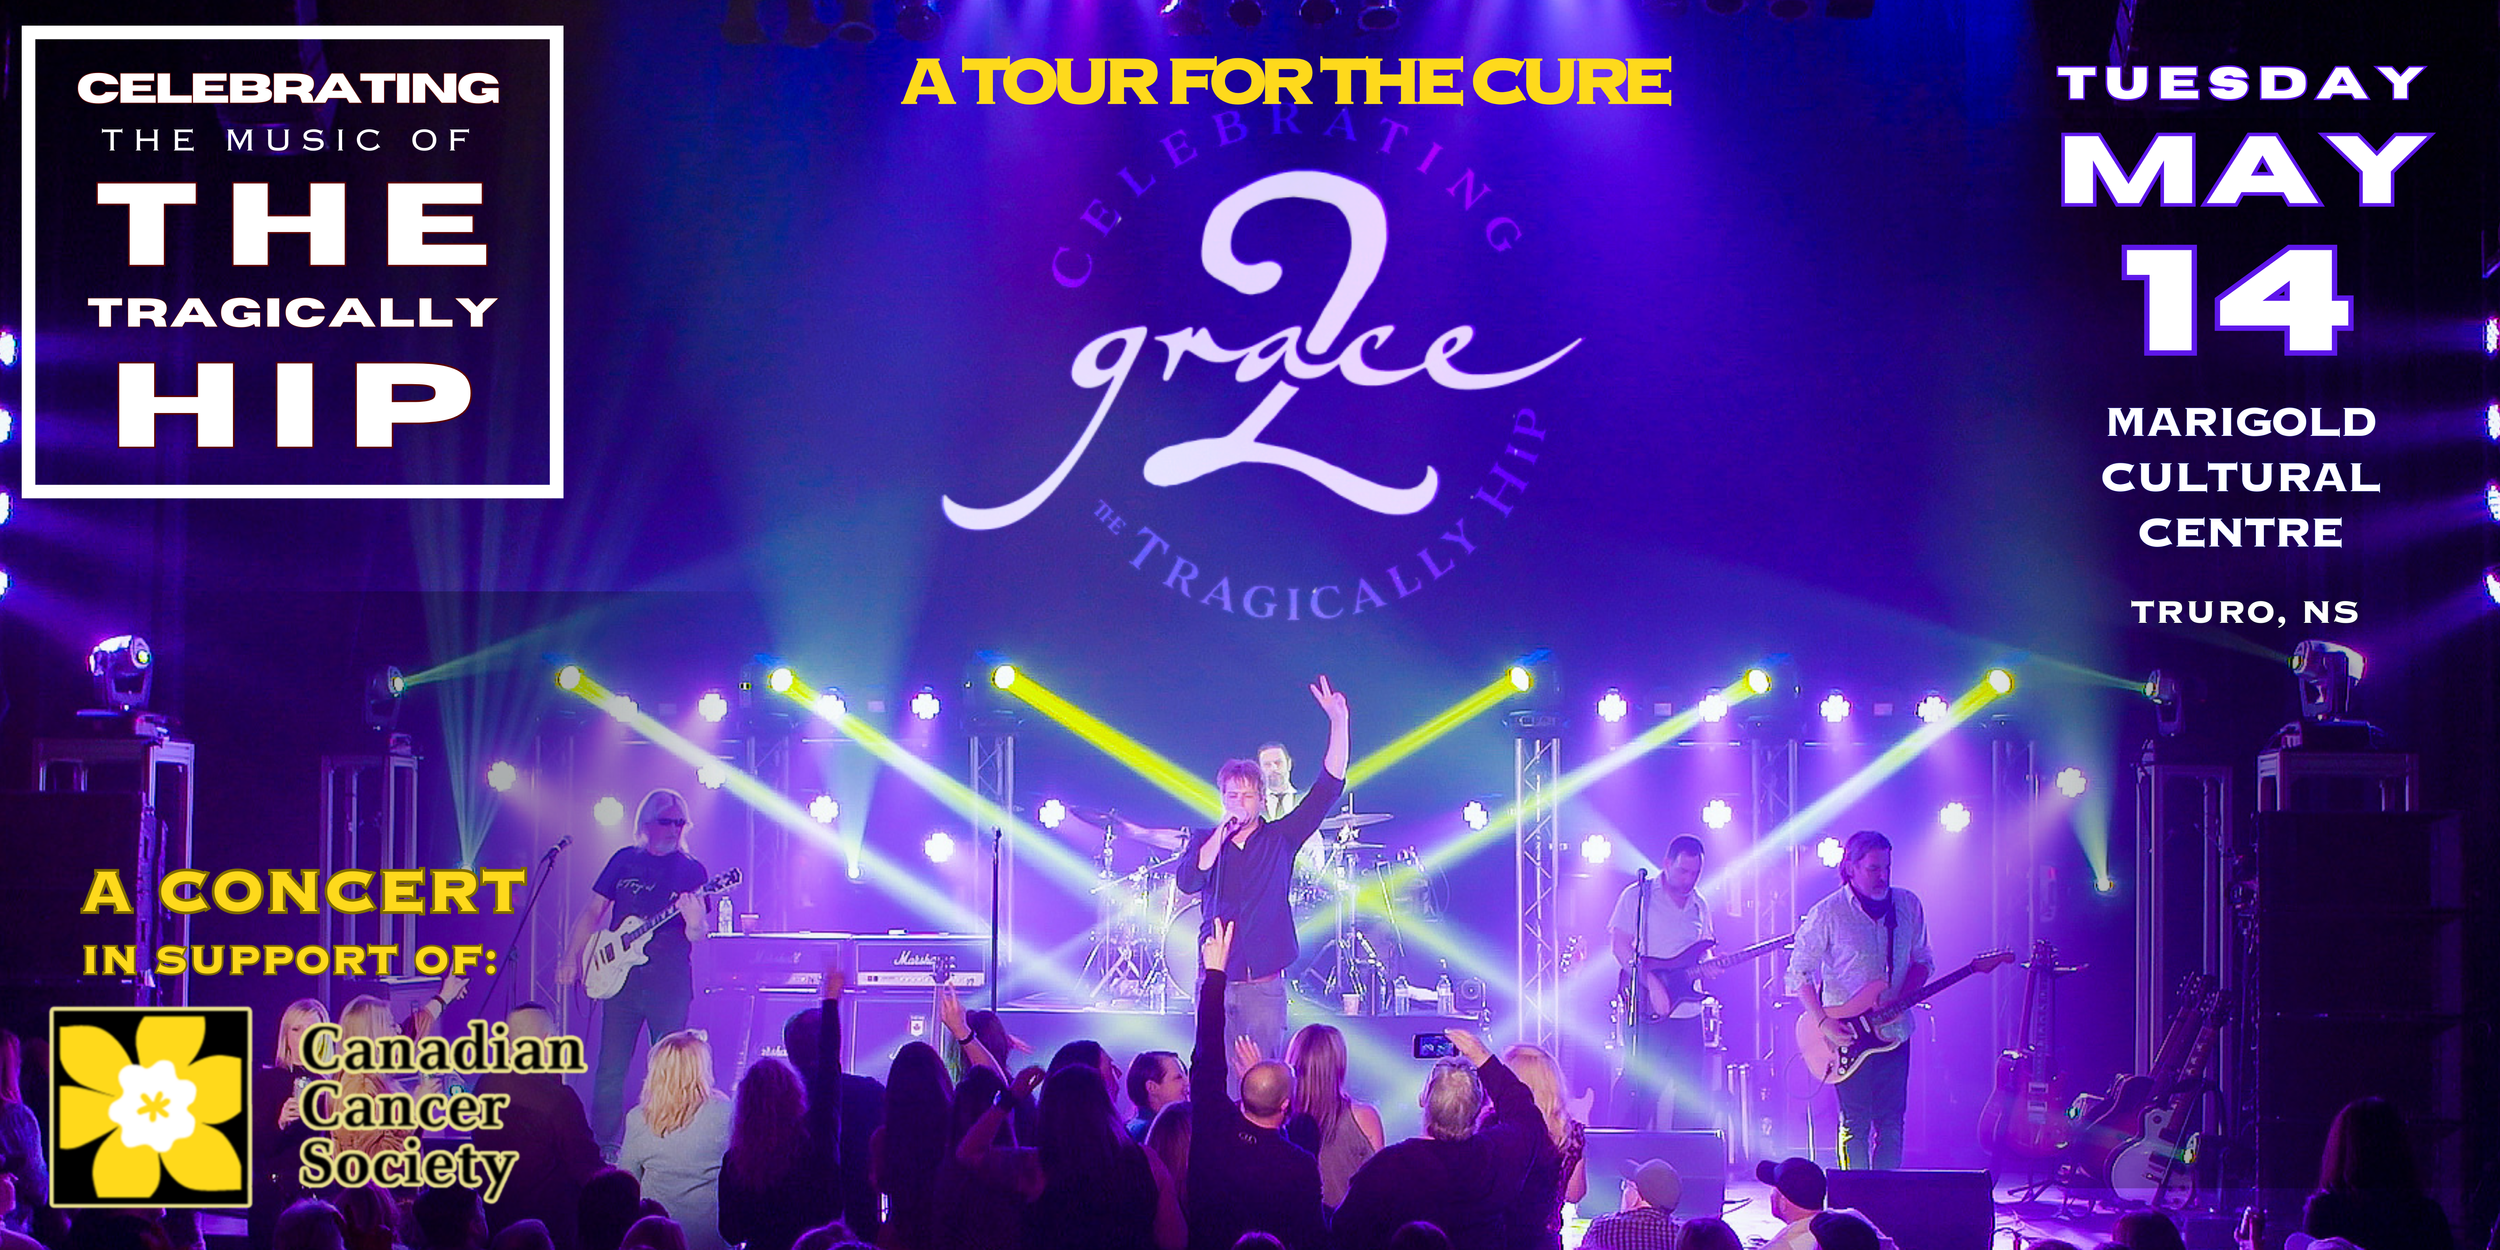   Grace, 2 – Celebrating The Tragically Hip A Tour for the Cure   May 14 